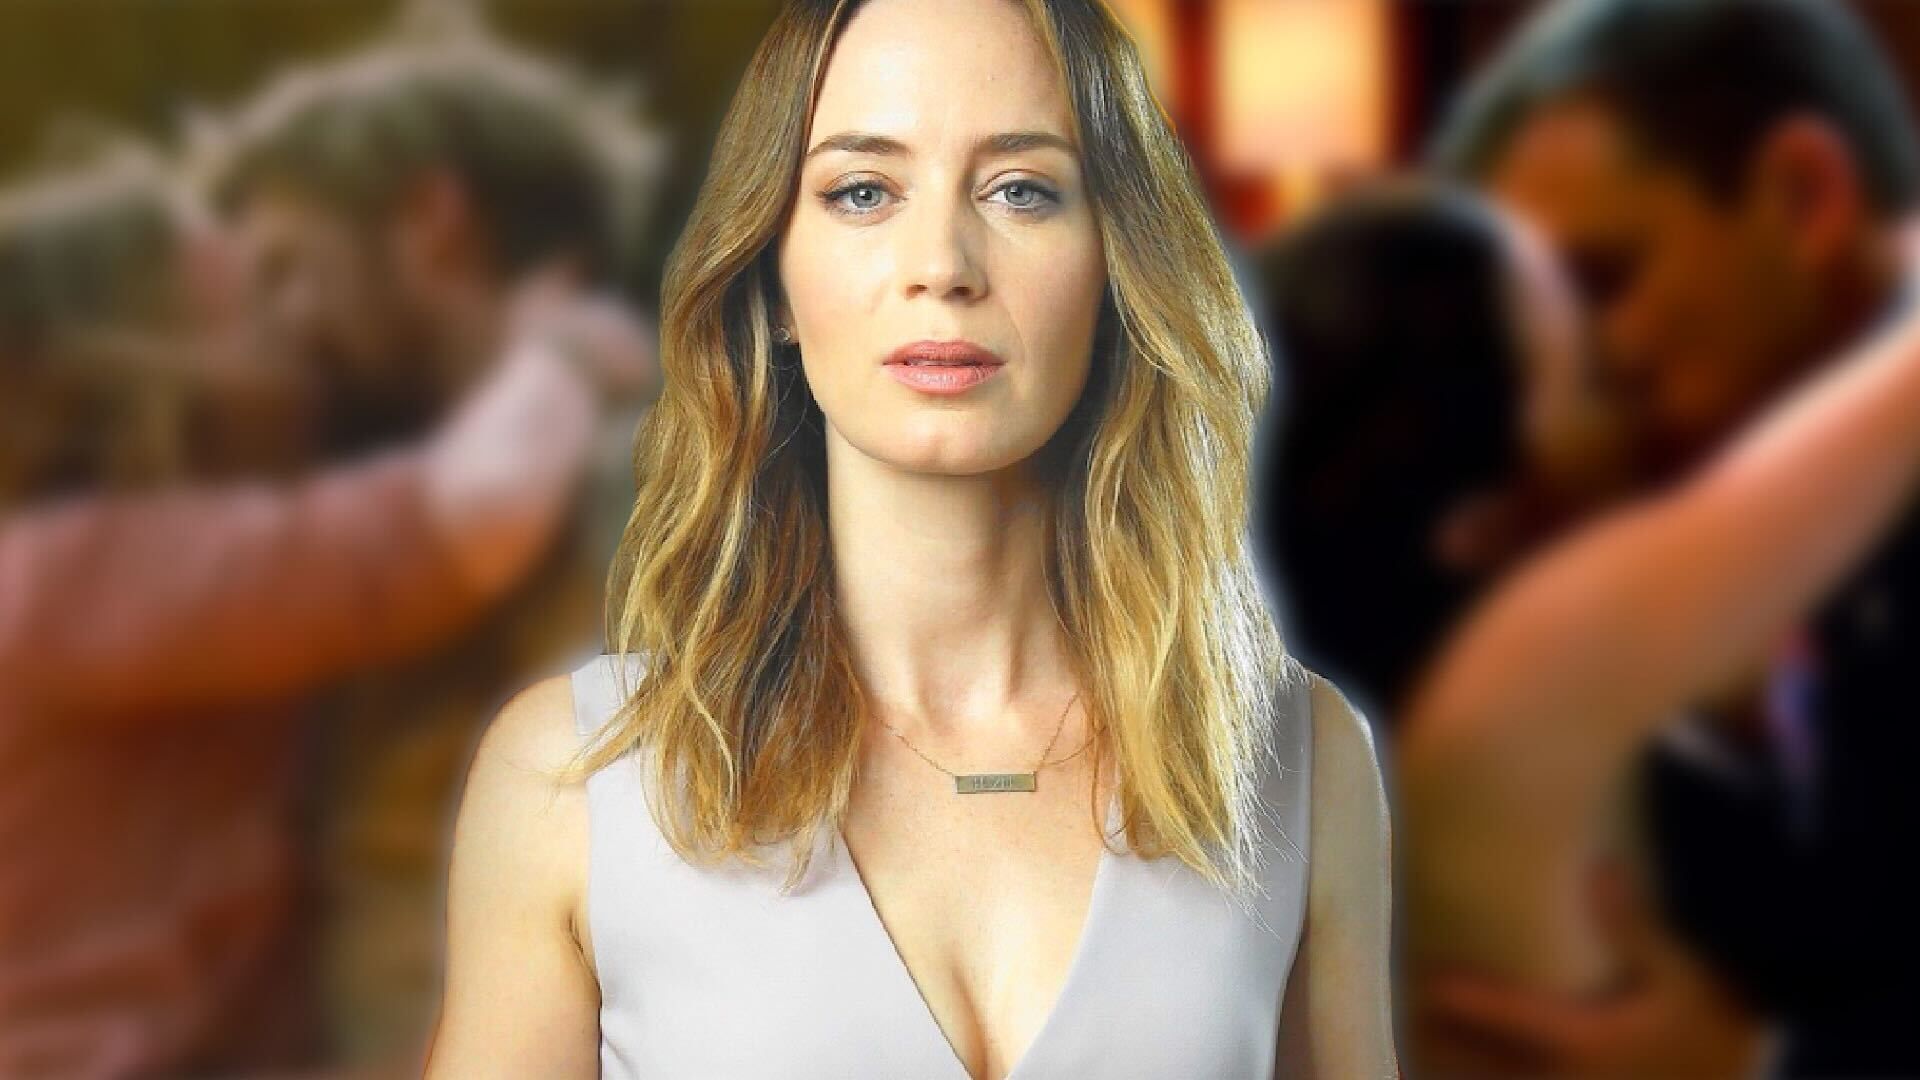 Emily Blunt with two kissing scenes from her movies in the background